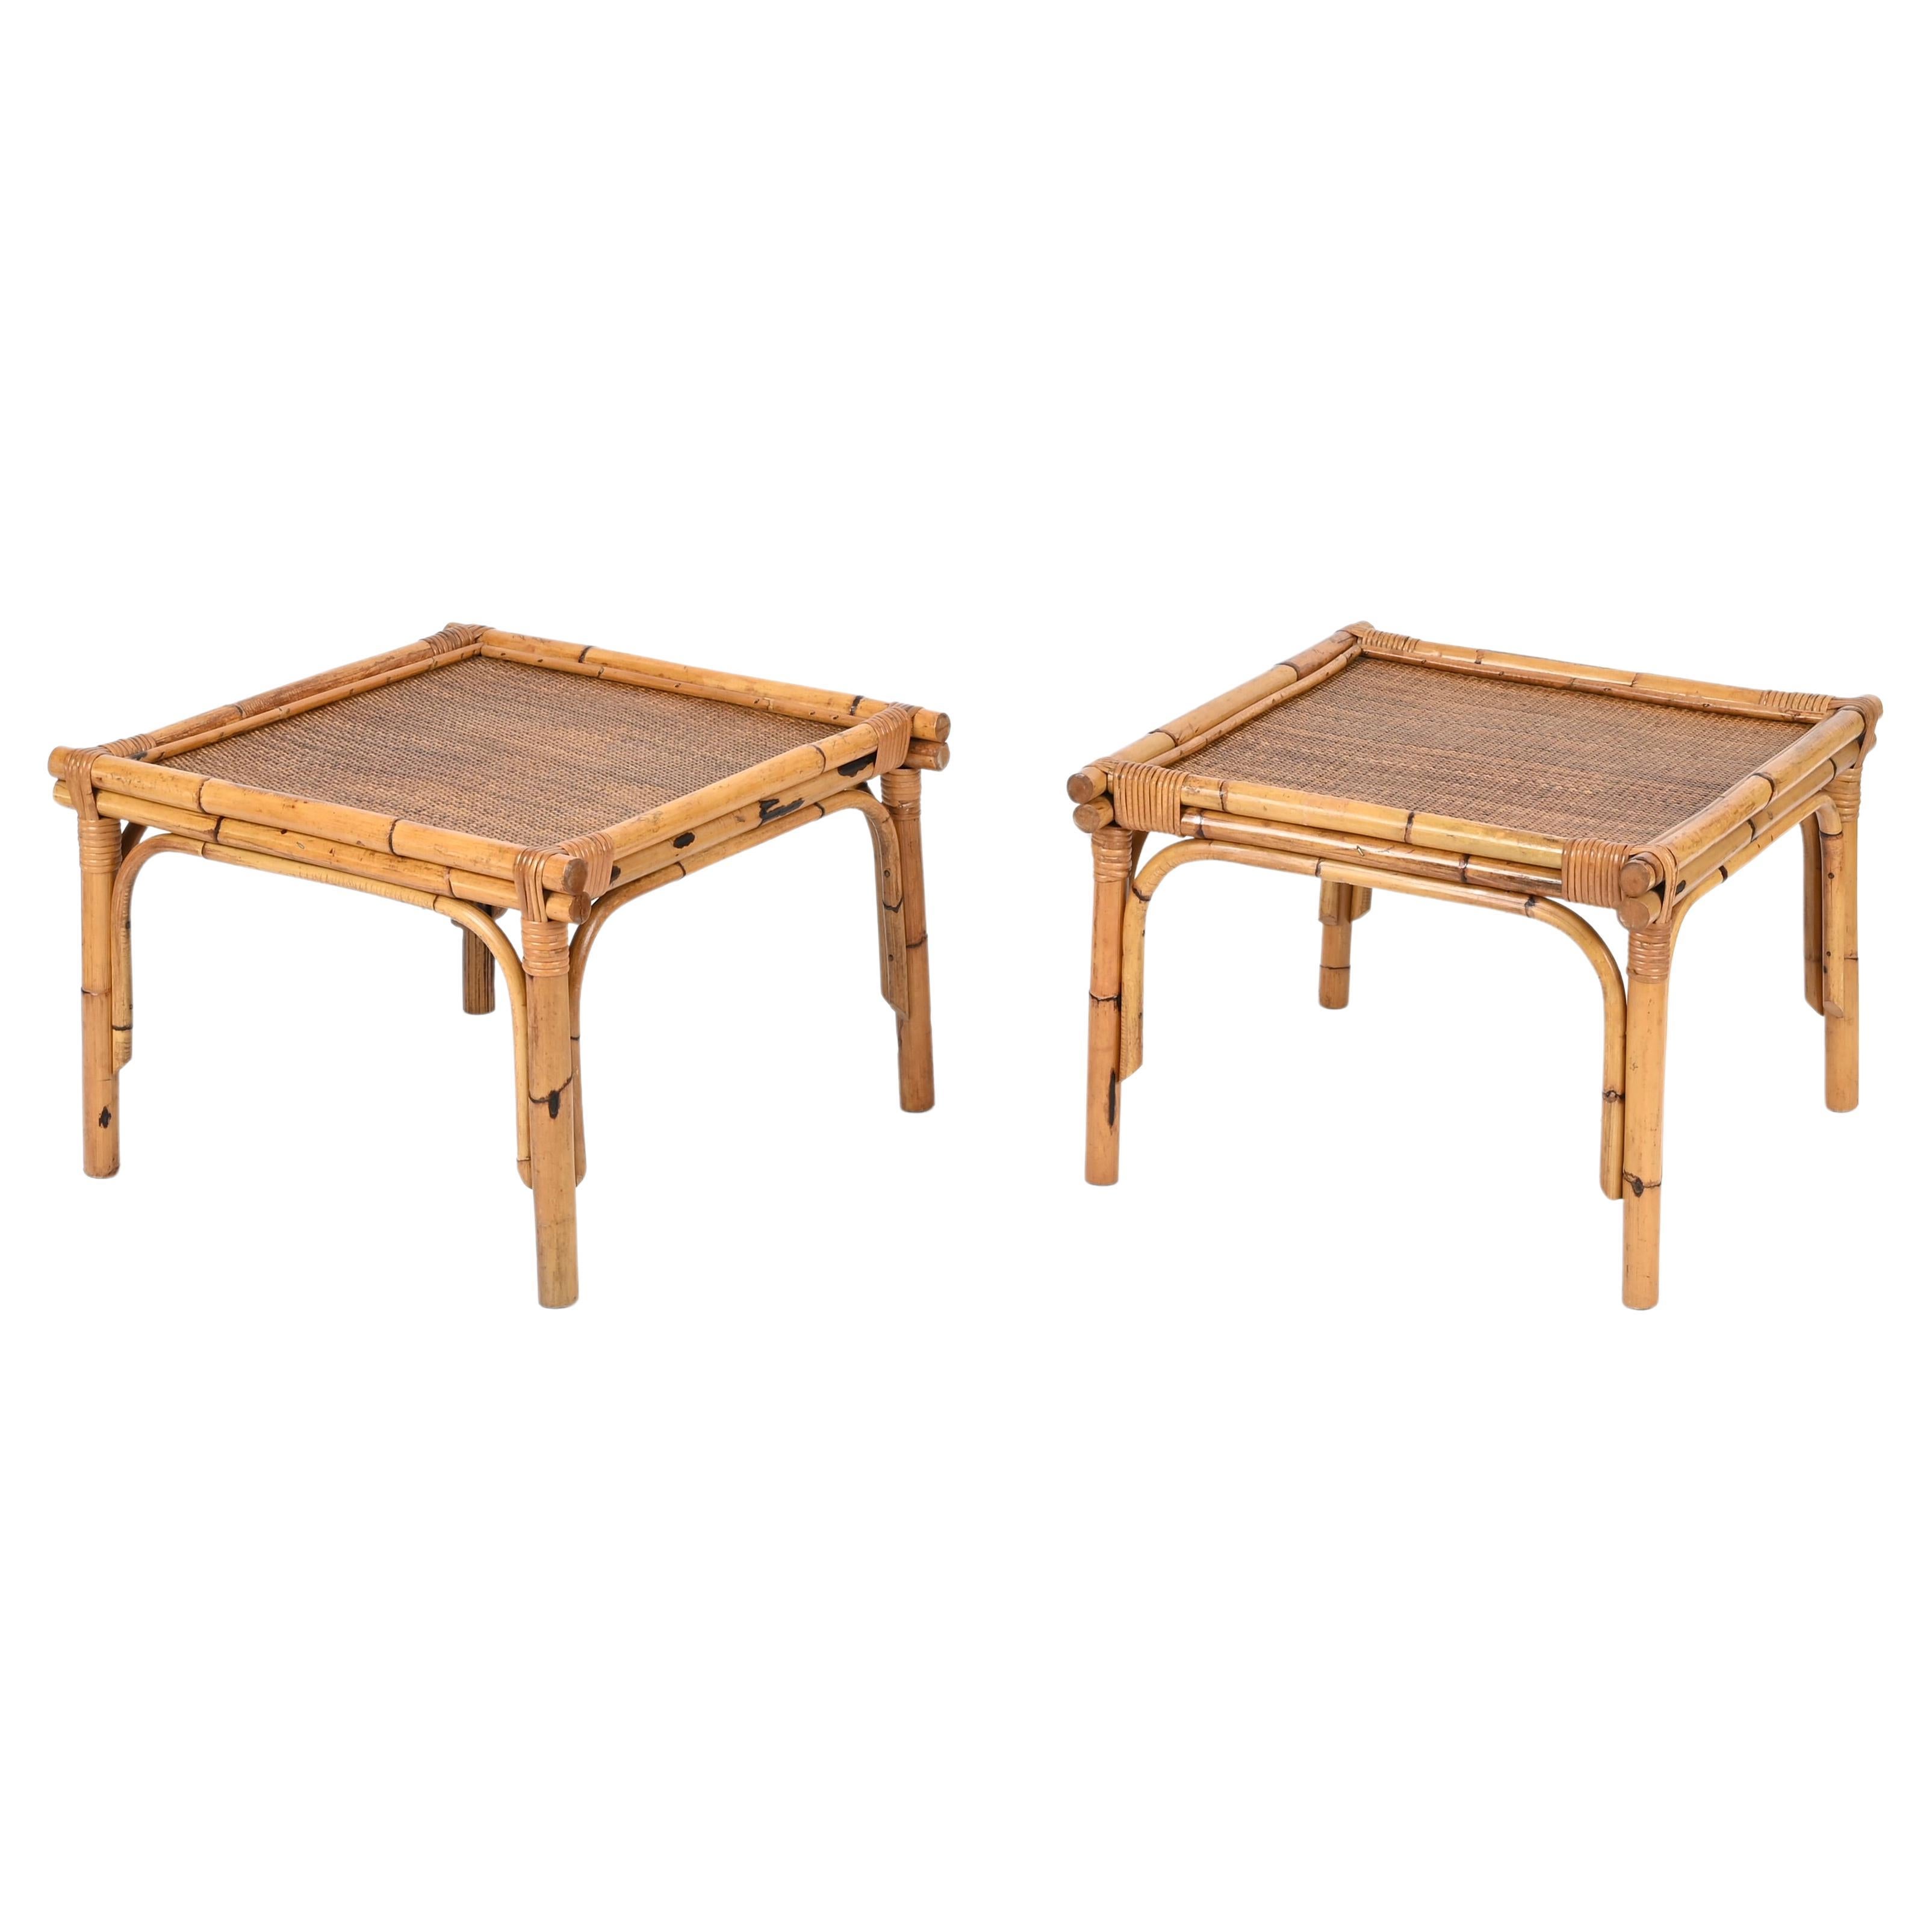 Pair of French Riviera Square Coffee Table in Rattan and Wicker, Italy 1970s